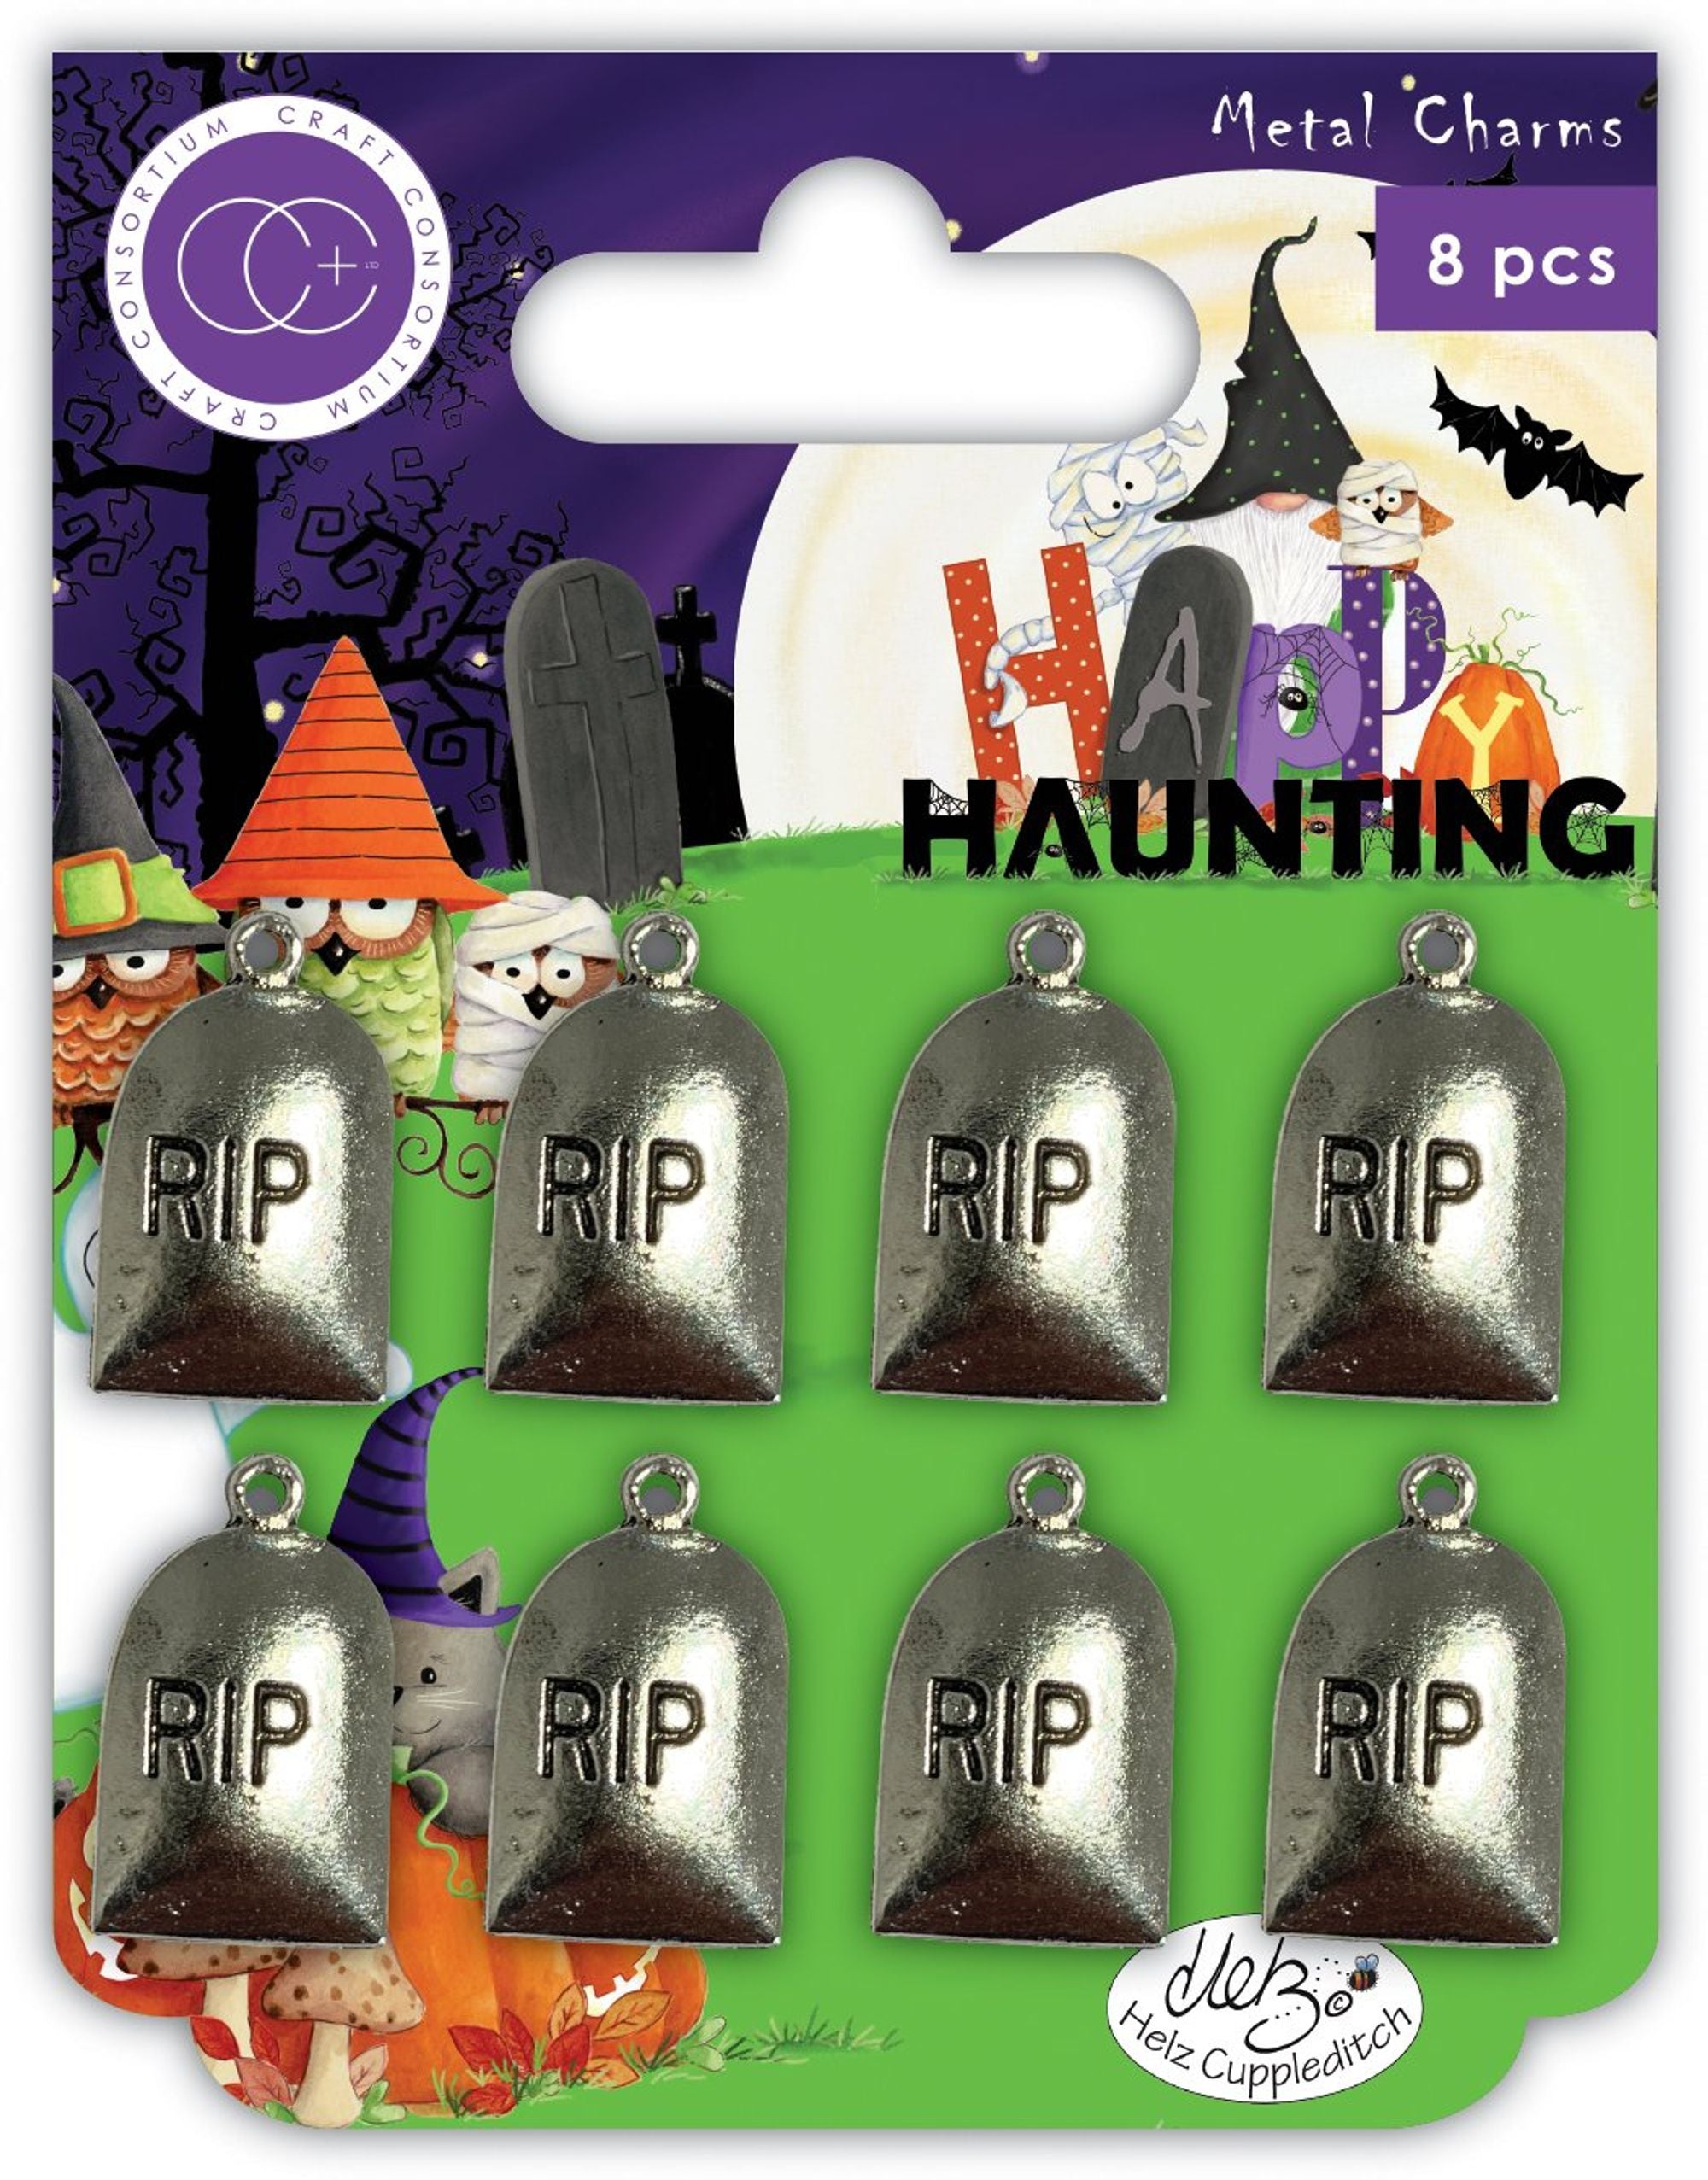 Happy Haunting Metal Charms - Graves